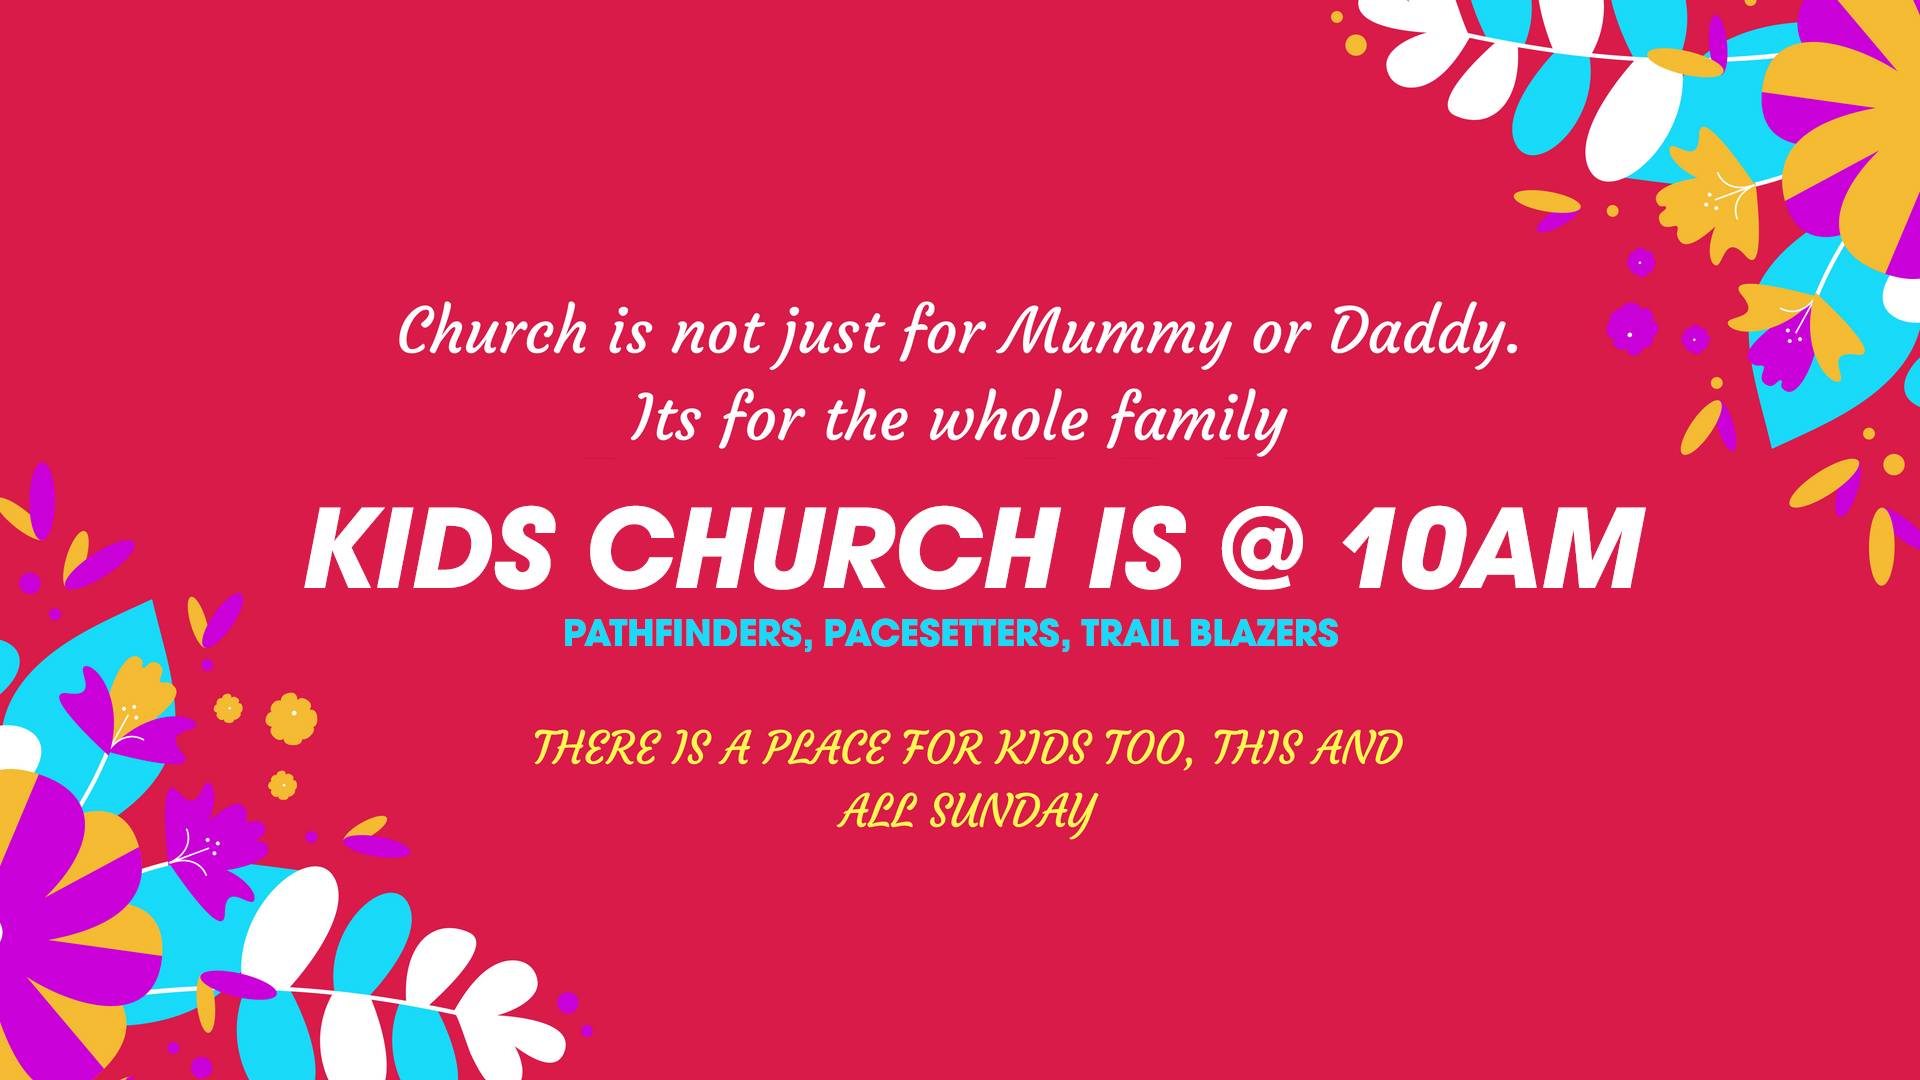 United Life Chapel - Kids Church is at 10am on Sundays